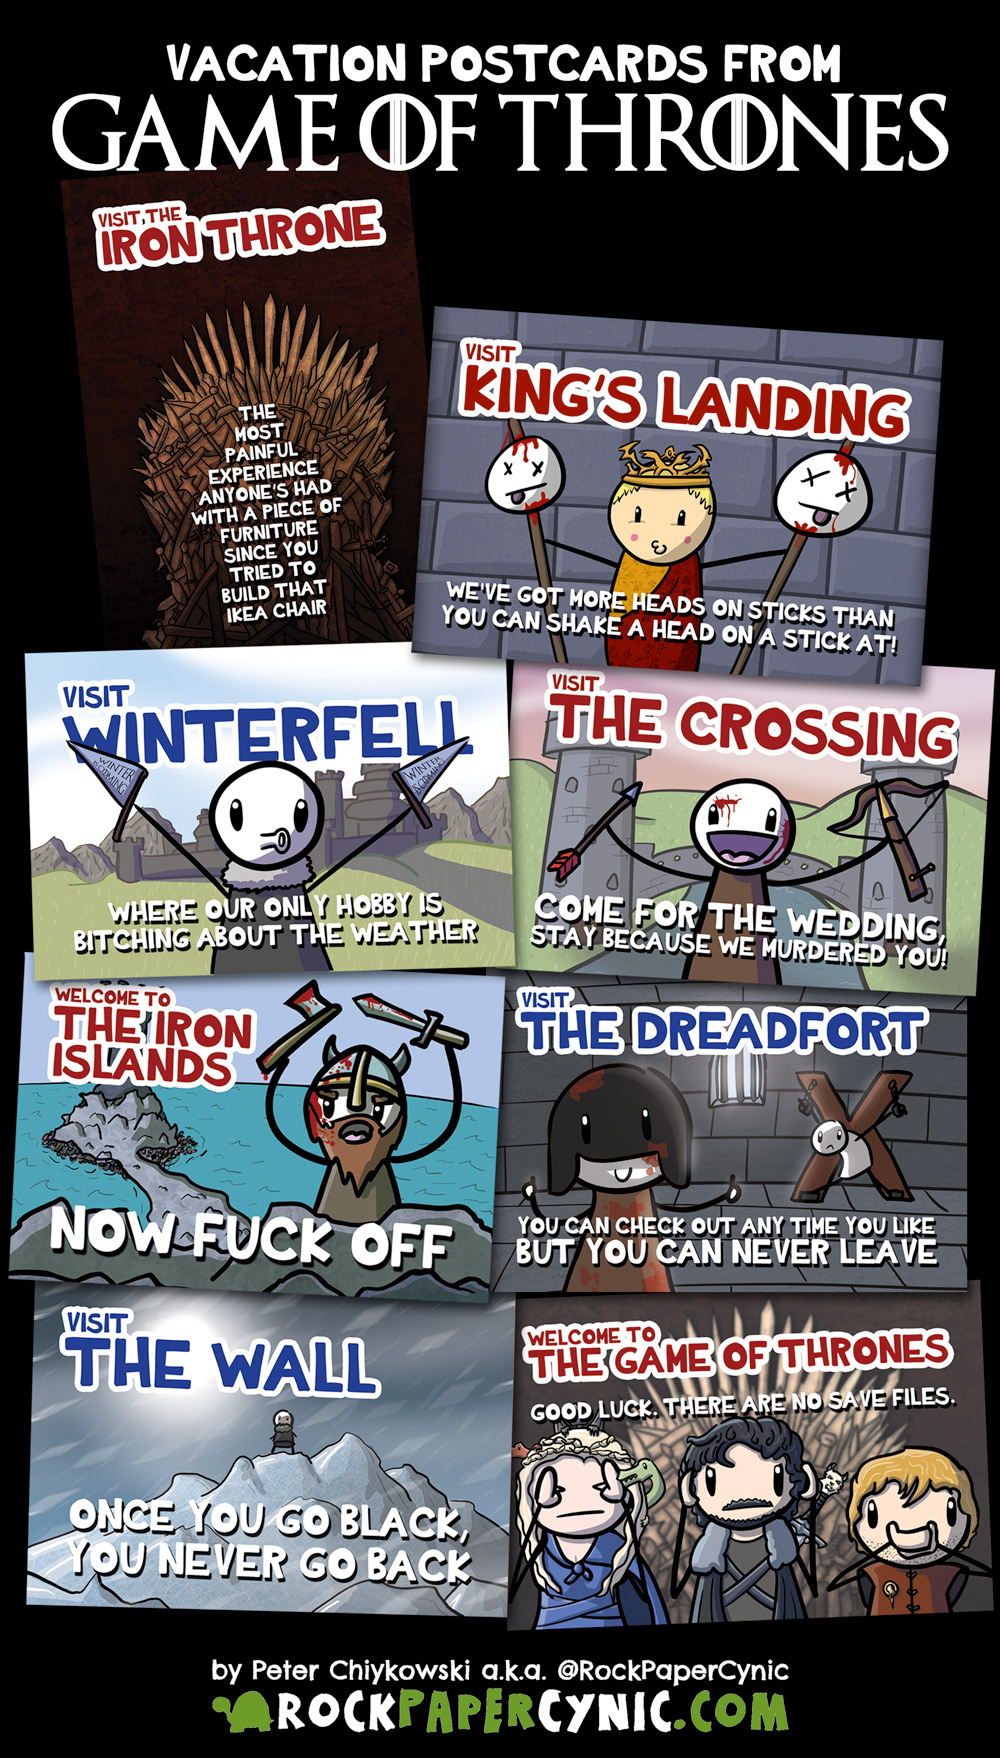 we share 8 Game of Thrones postcards you can send to your friends on your next vacation in Westeros!